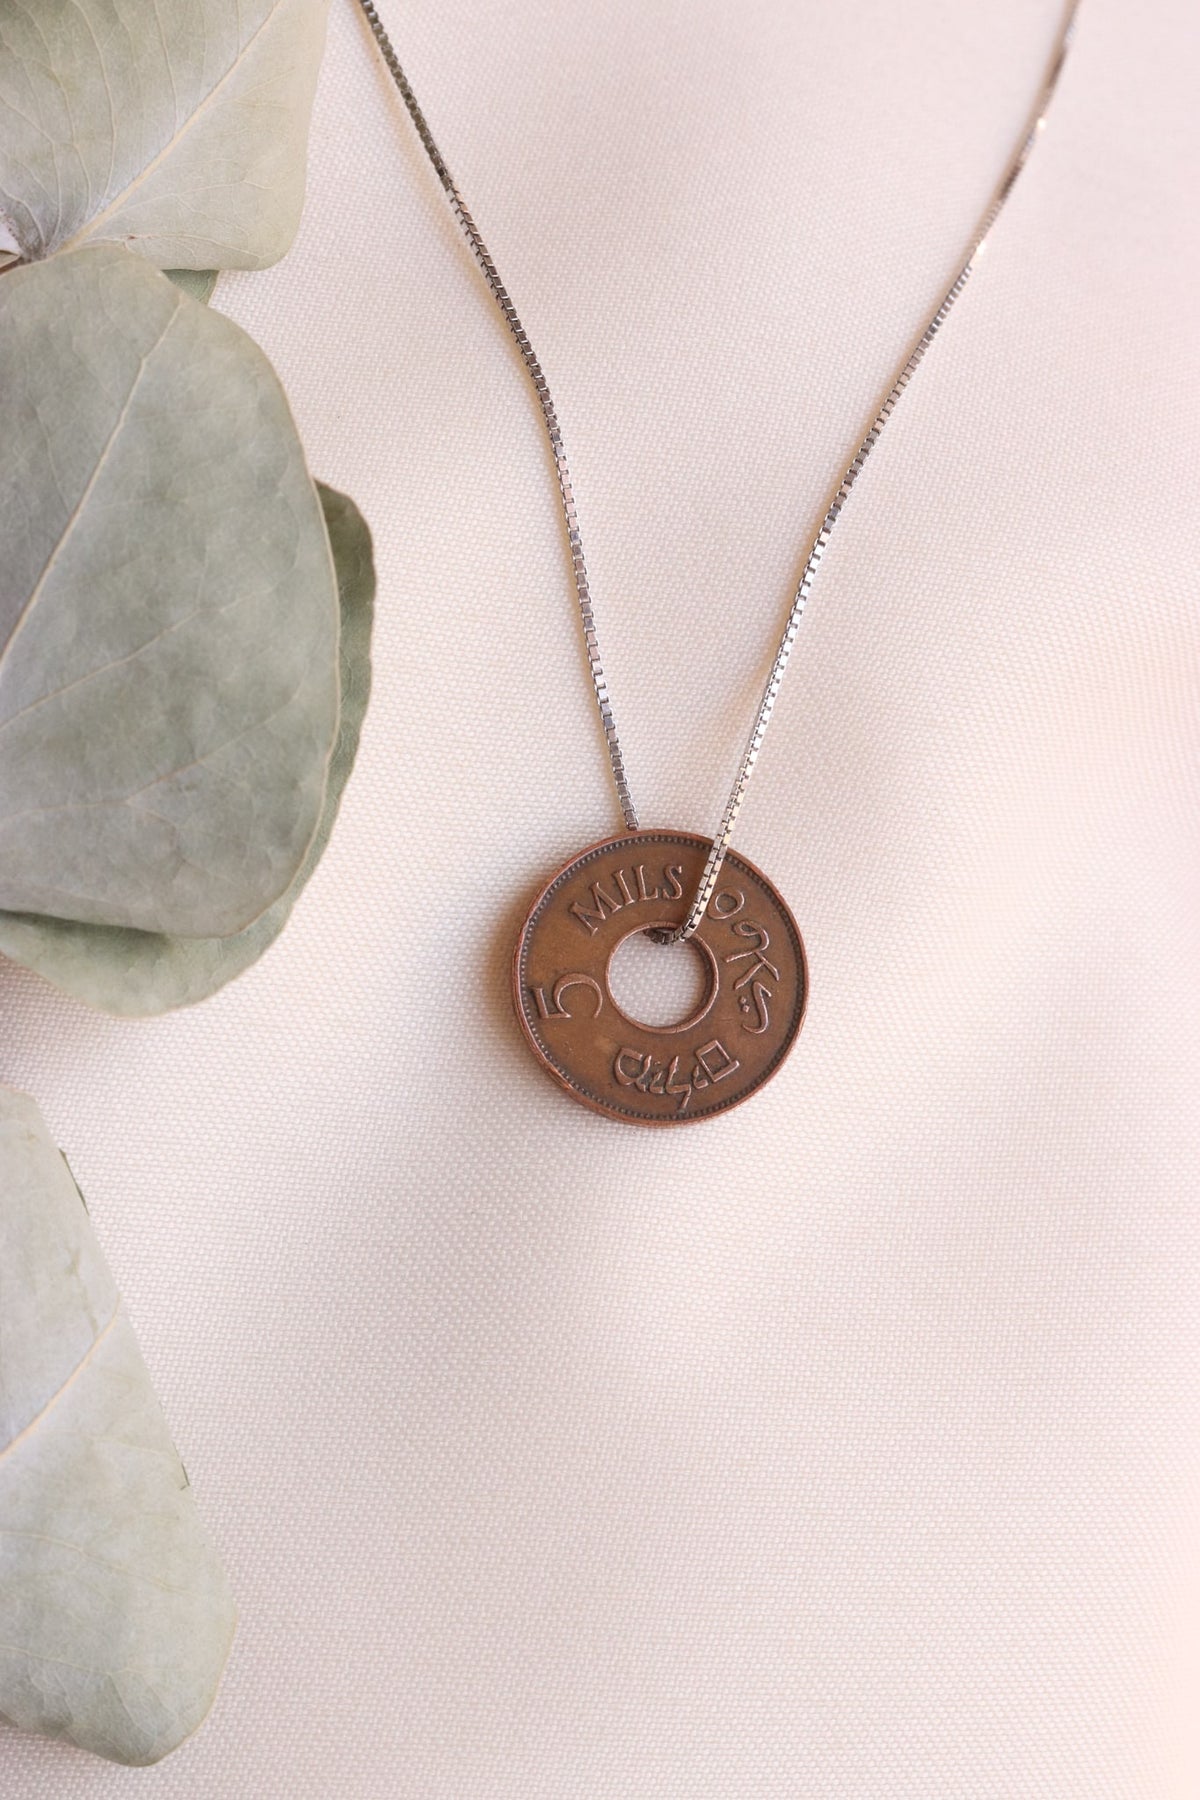 Palestinian coin 5 mil bronze necklace